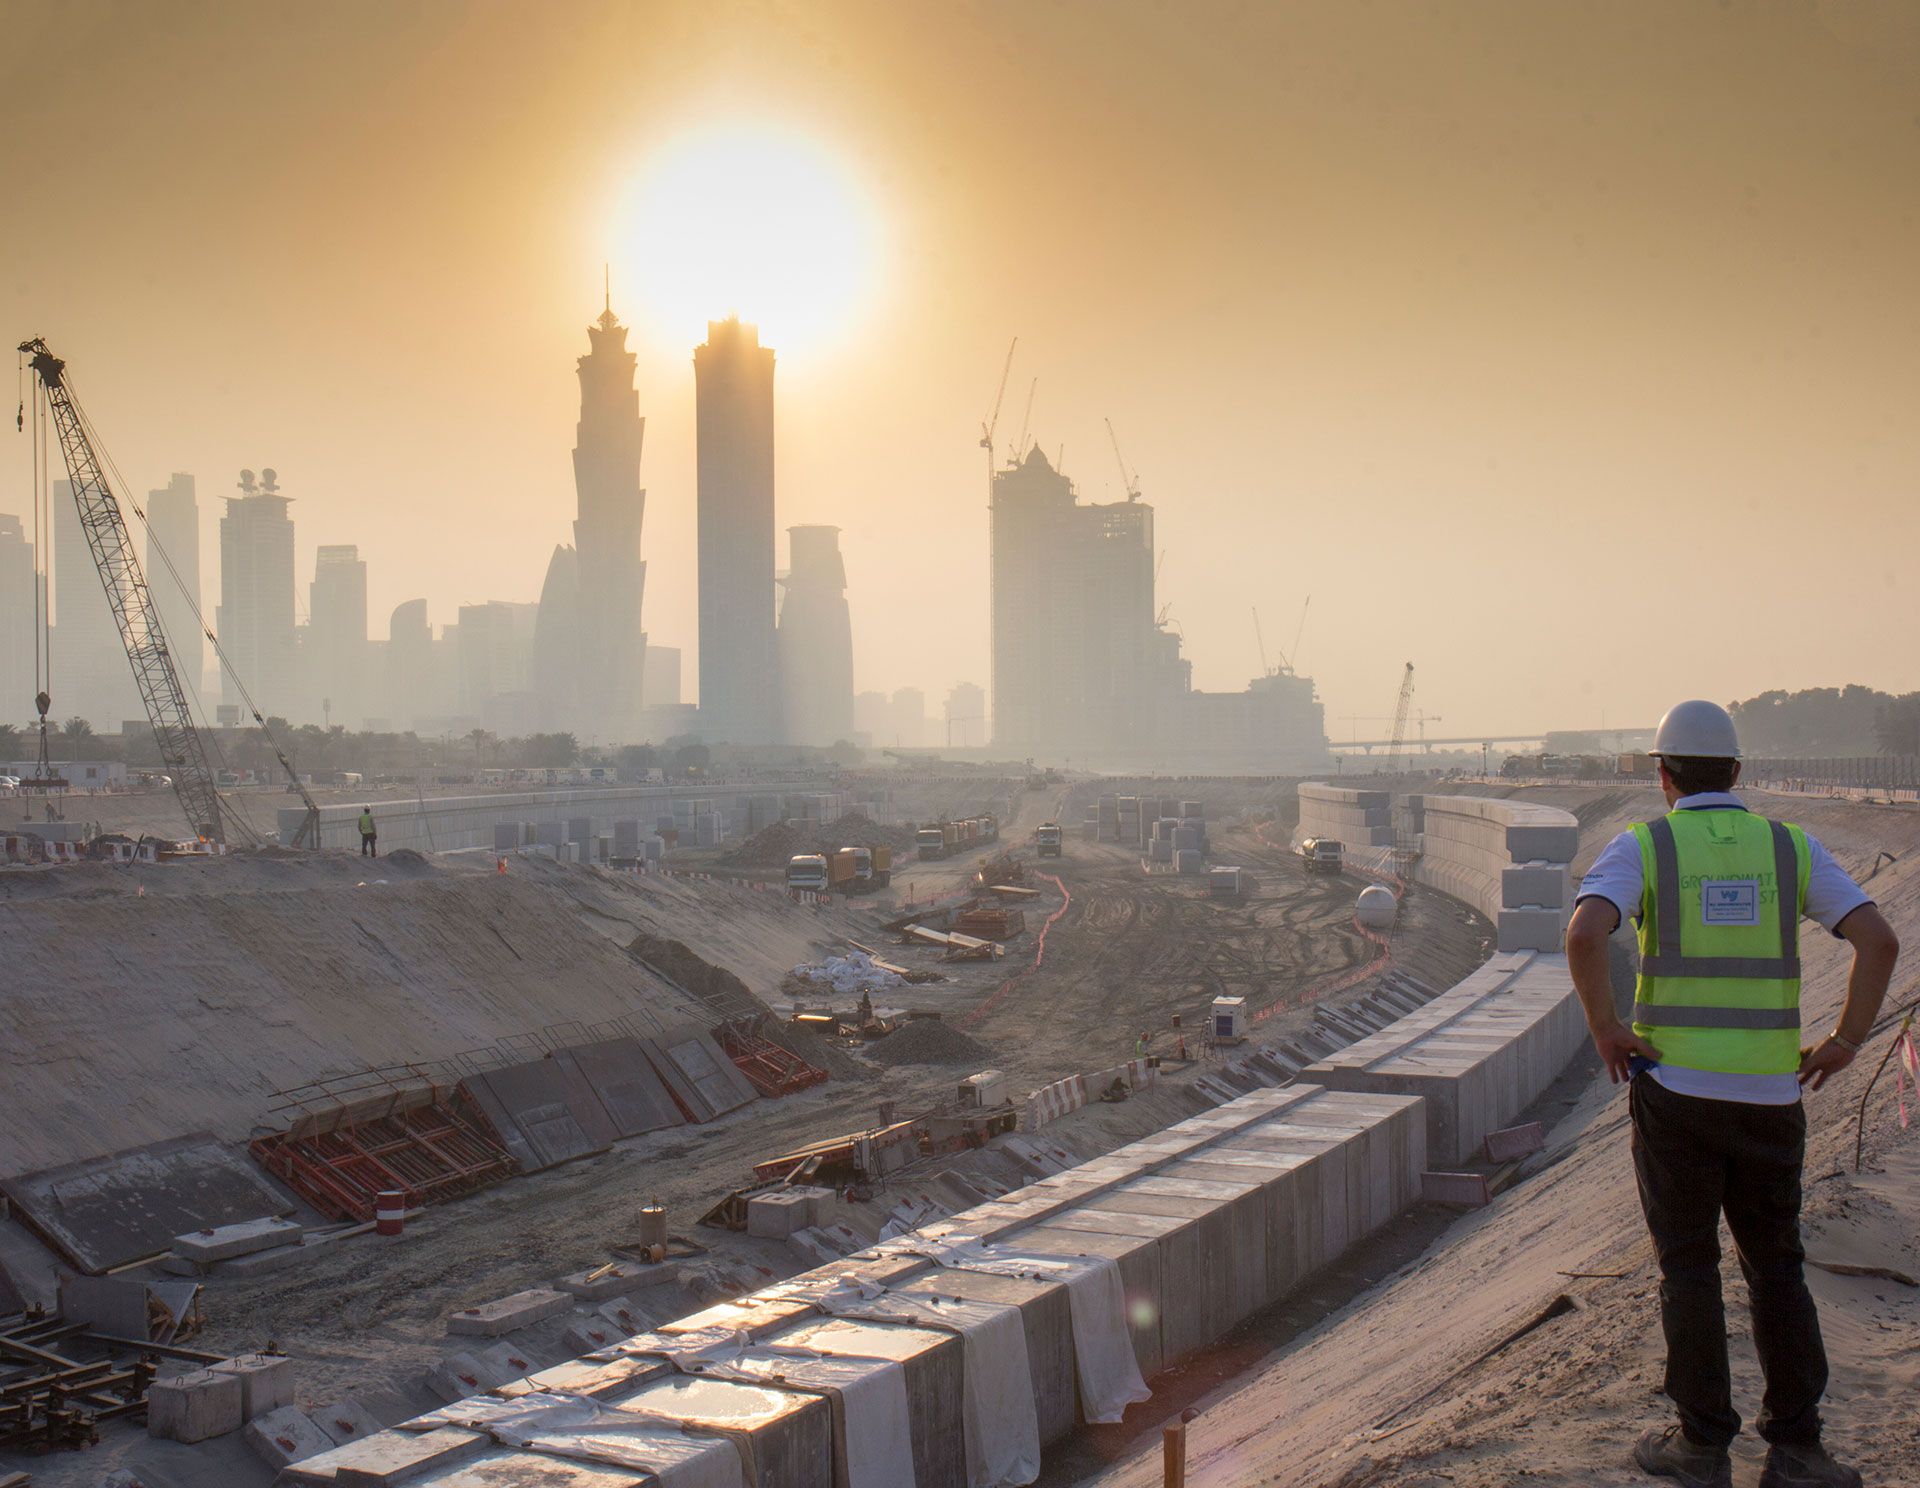 Dubai Water Canal Project dewatered by WJ Groundwater